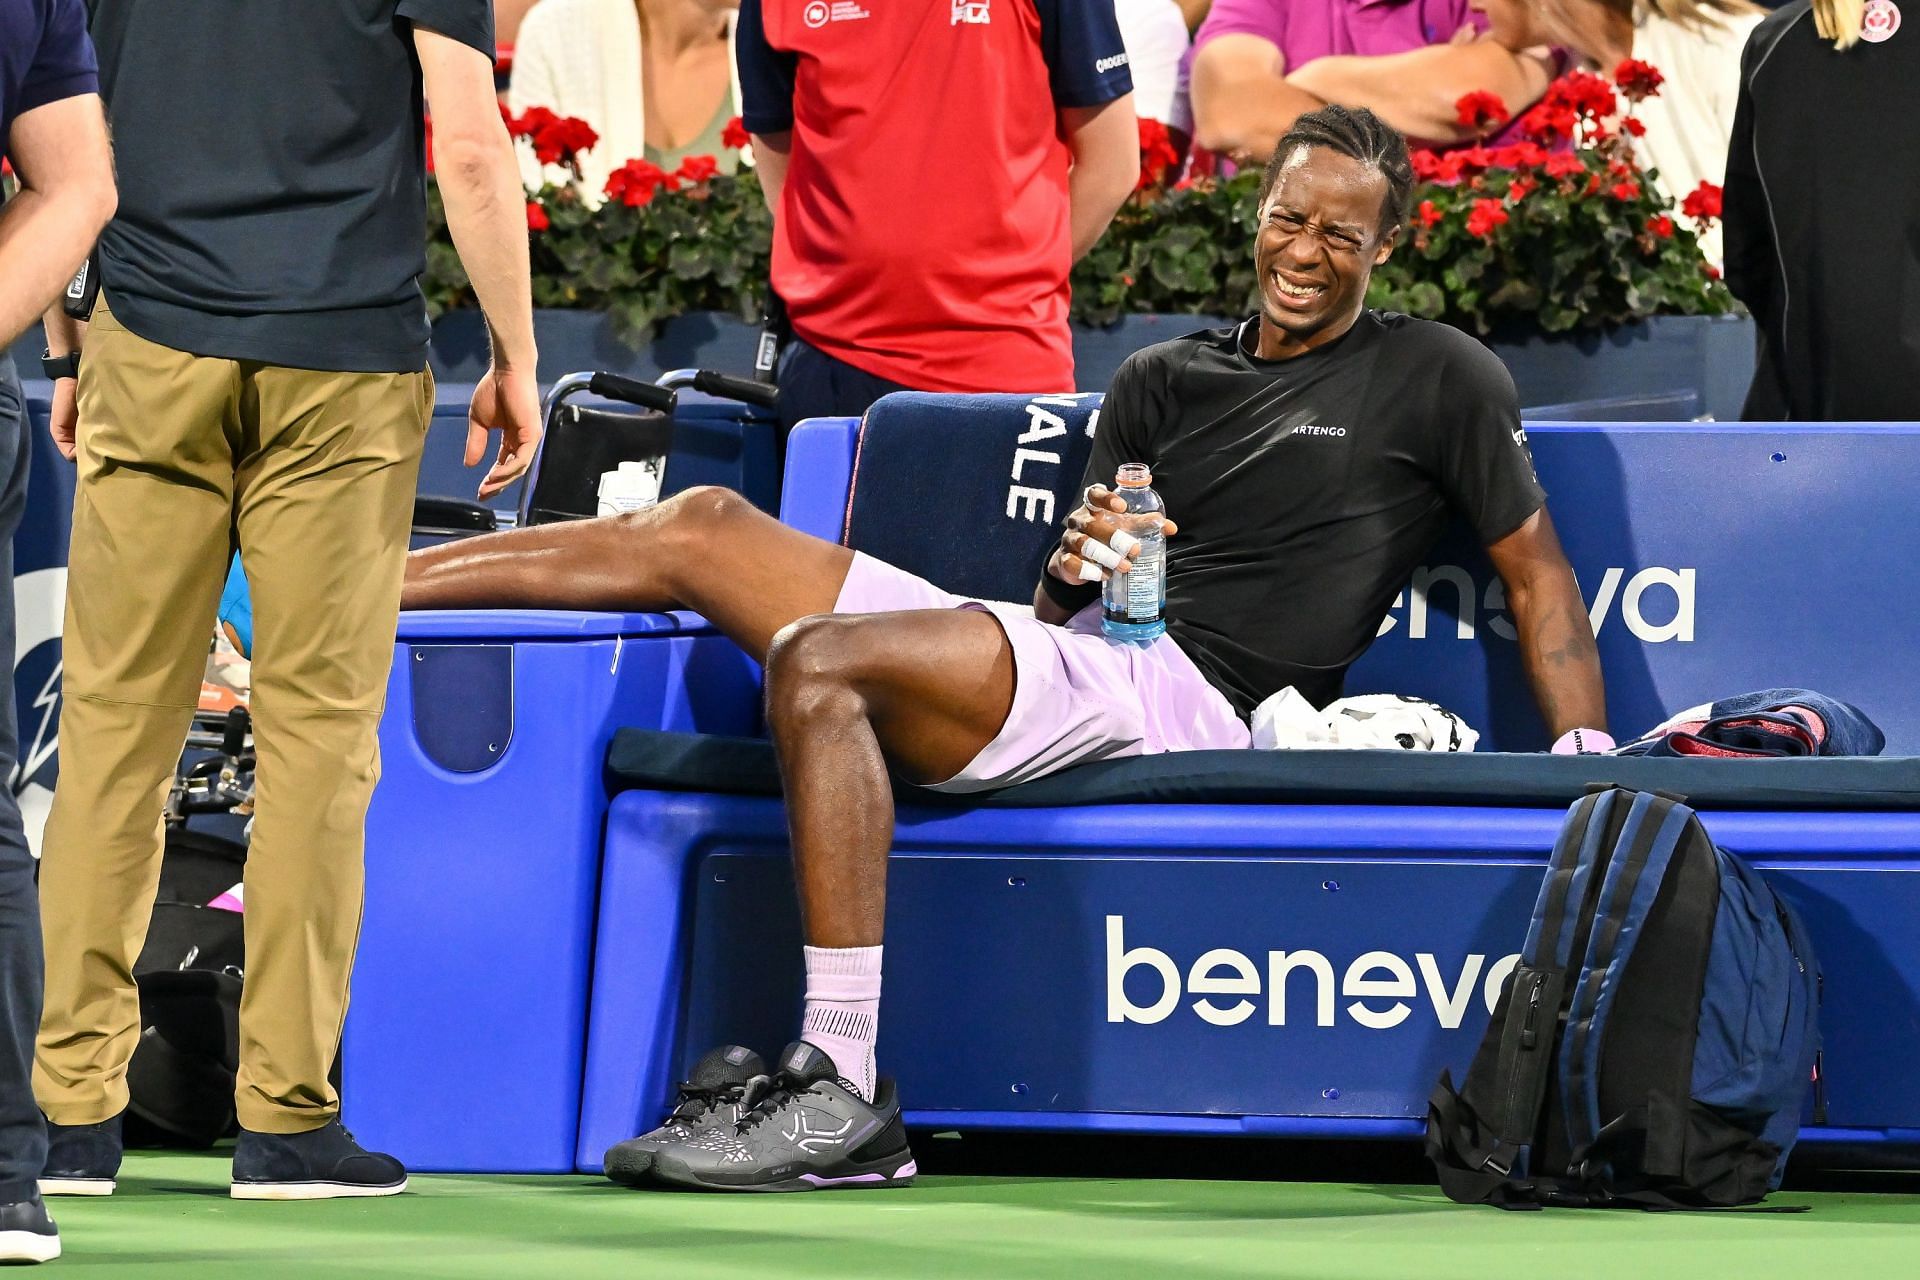 Gael Monfils suffered a foot injury at the 2022 Canadian Open